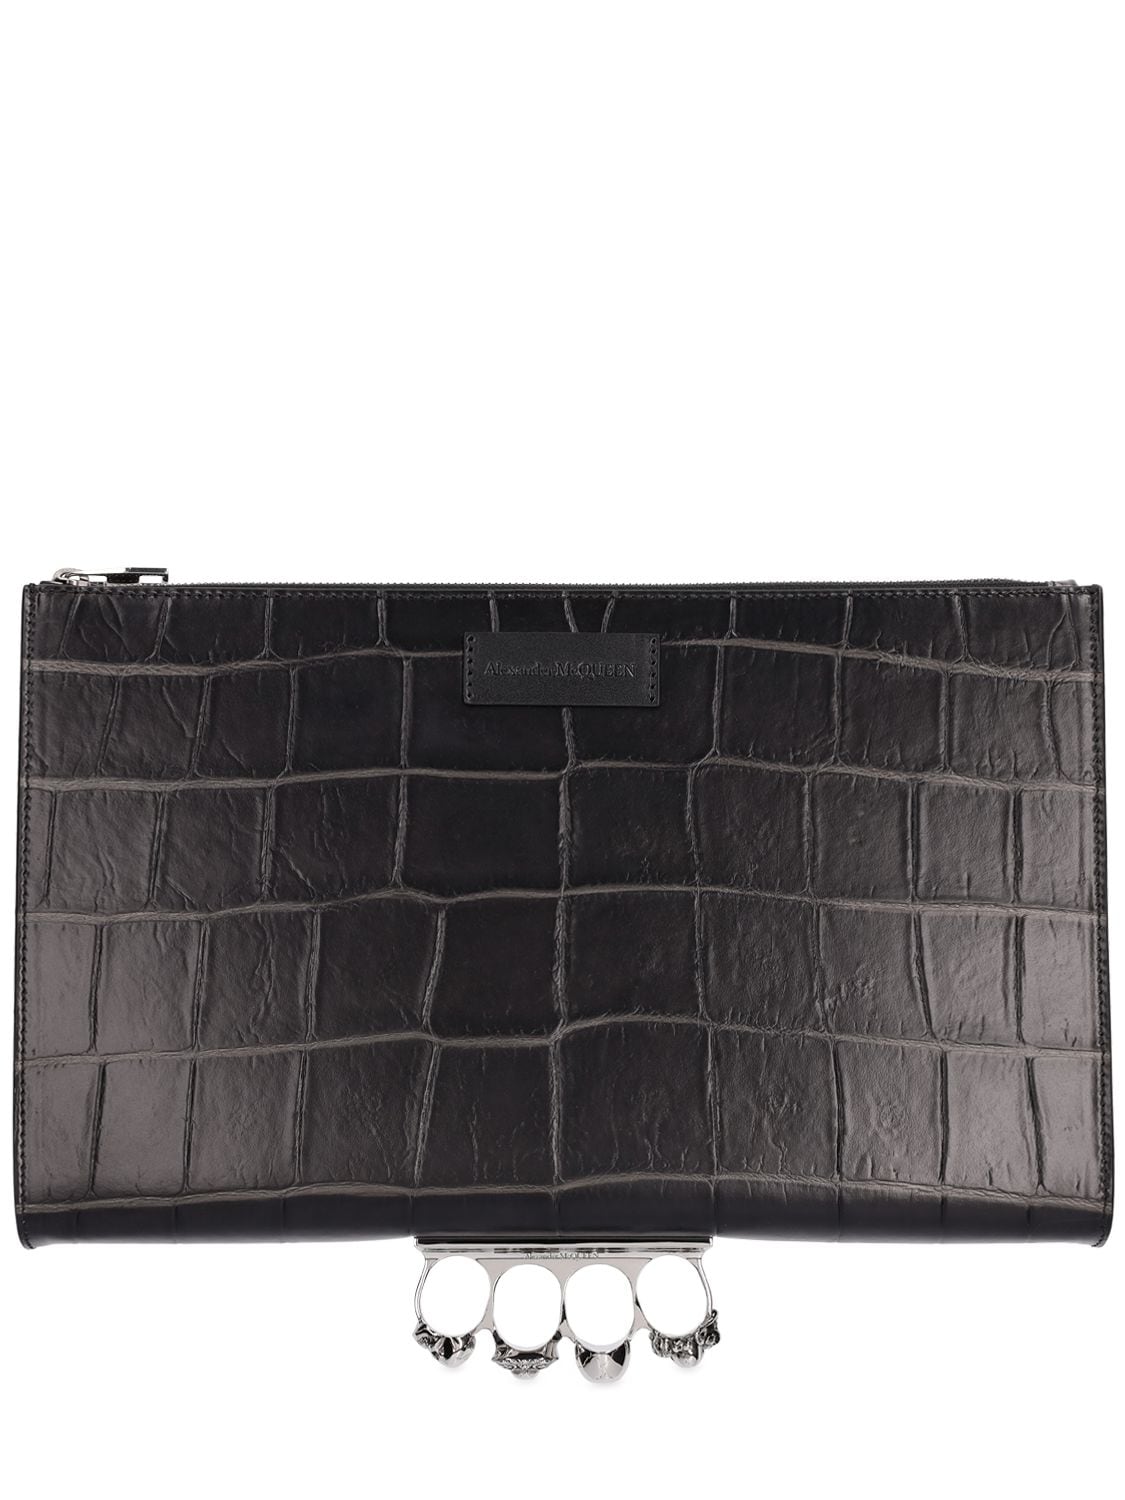 ALEXANDER MCQUEEN Four-ring Croc Print Leather Zip Pouch